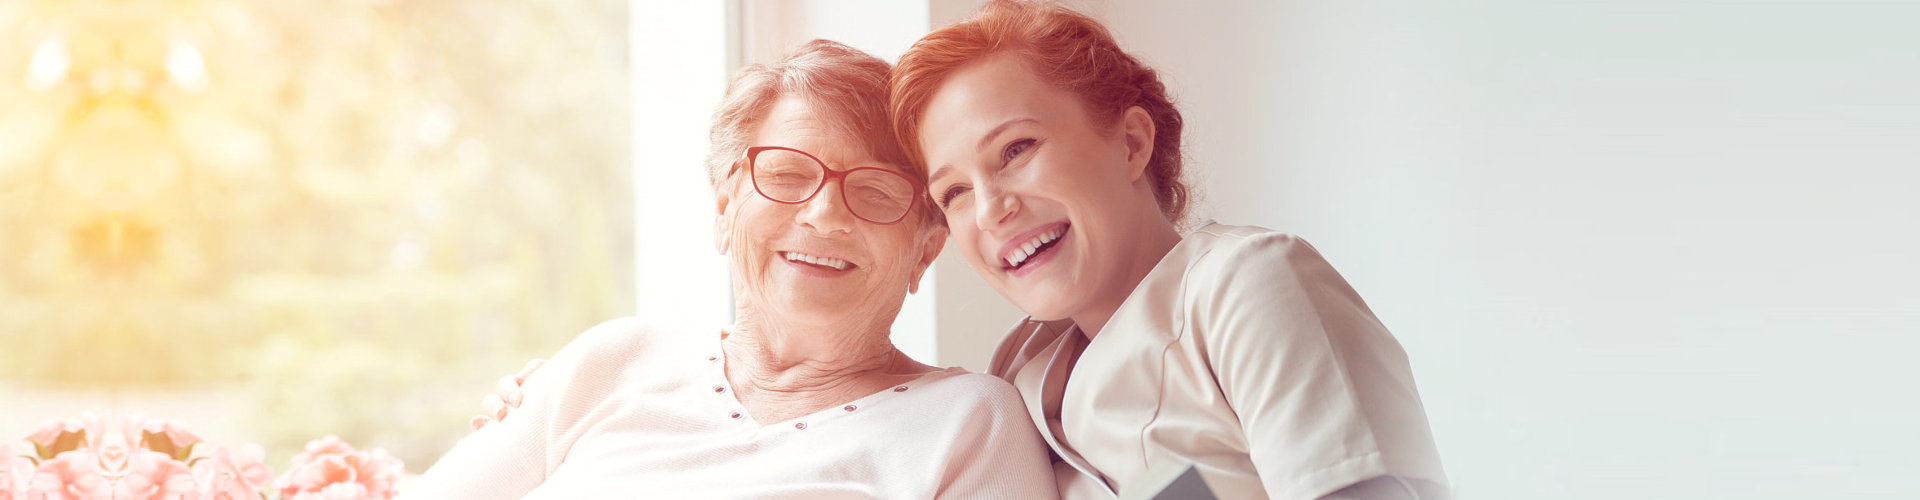 smiling elderly woman with smiling middle aged woman outdoor